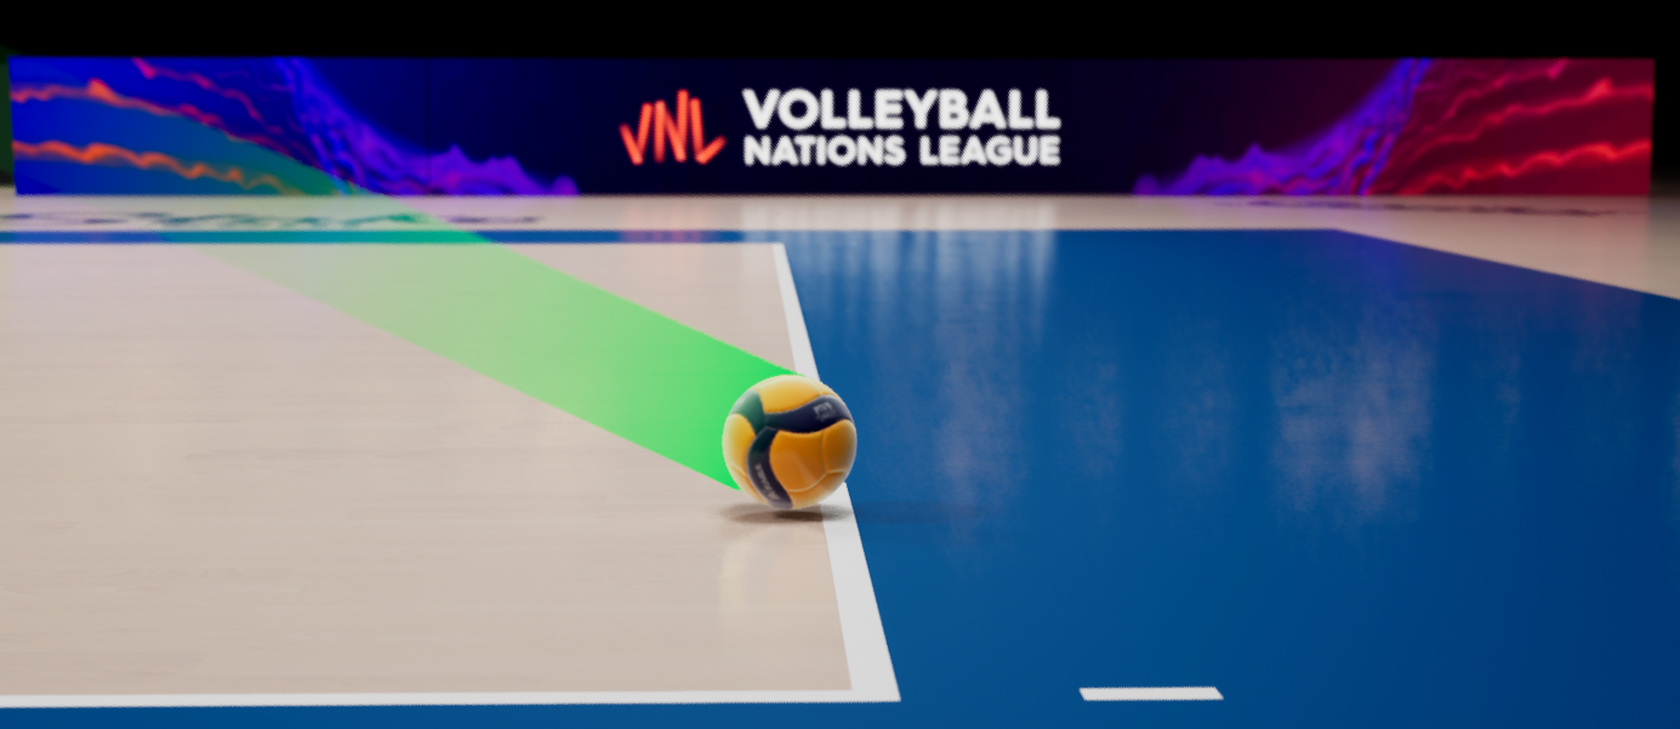 Bolt6's technology is expected to improve volleyball's video challenge system ©Volleyball World